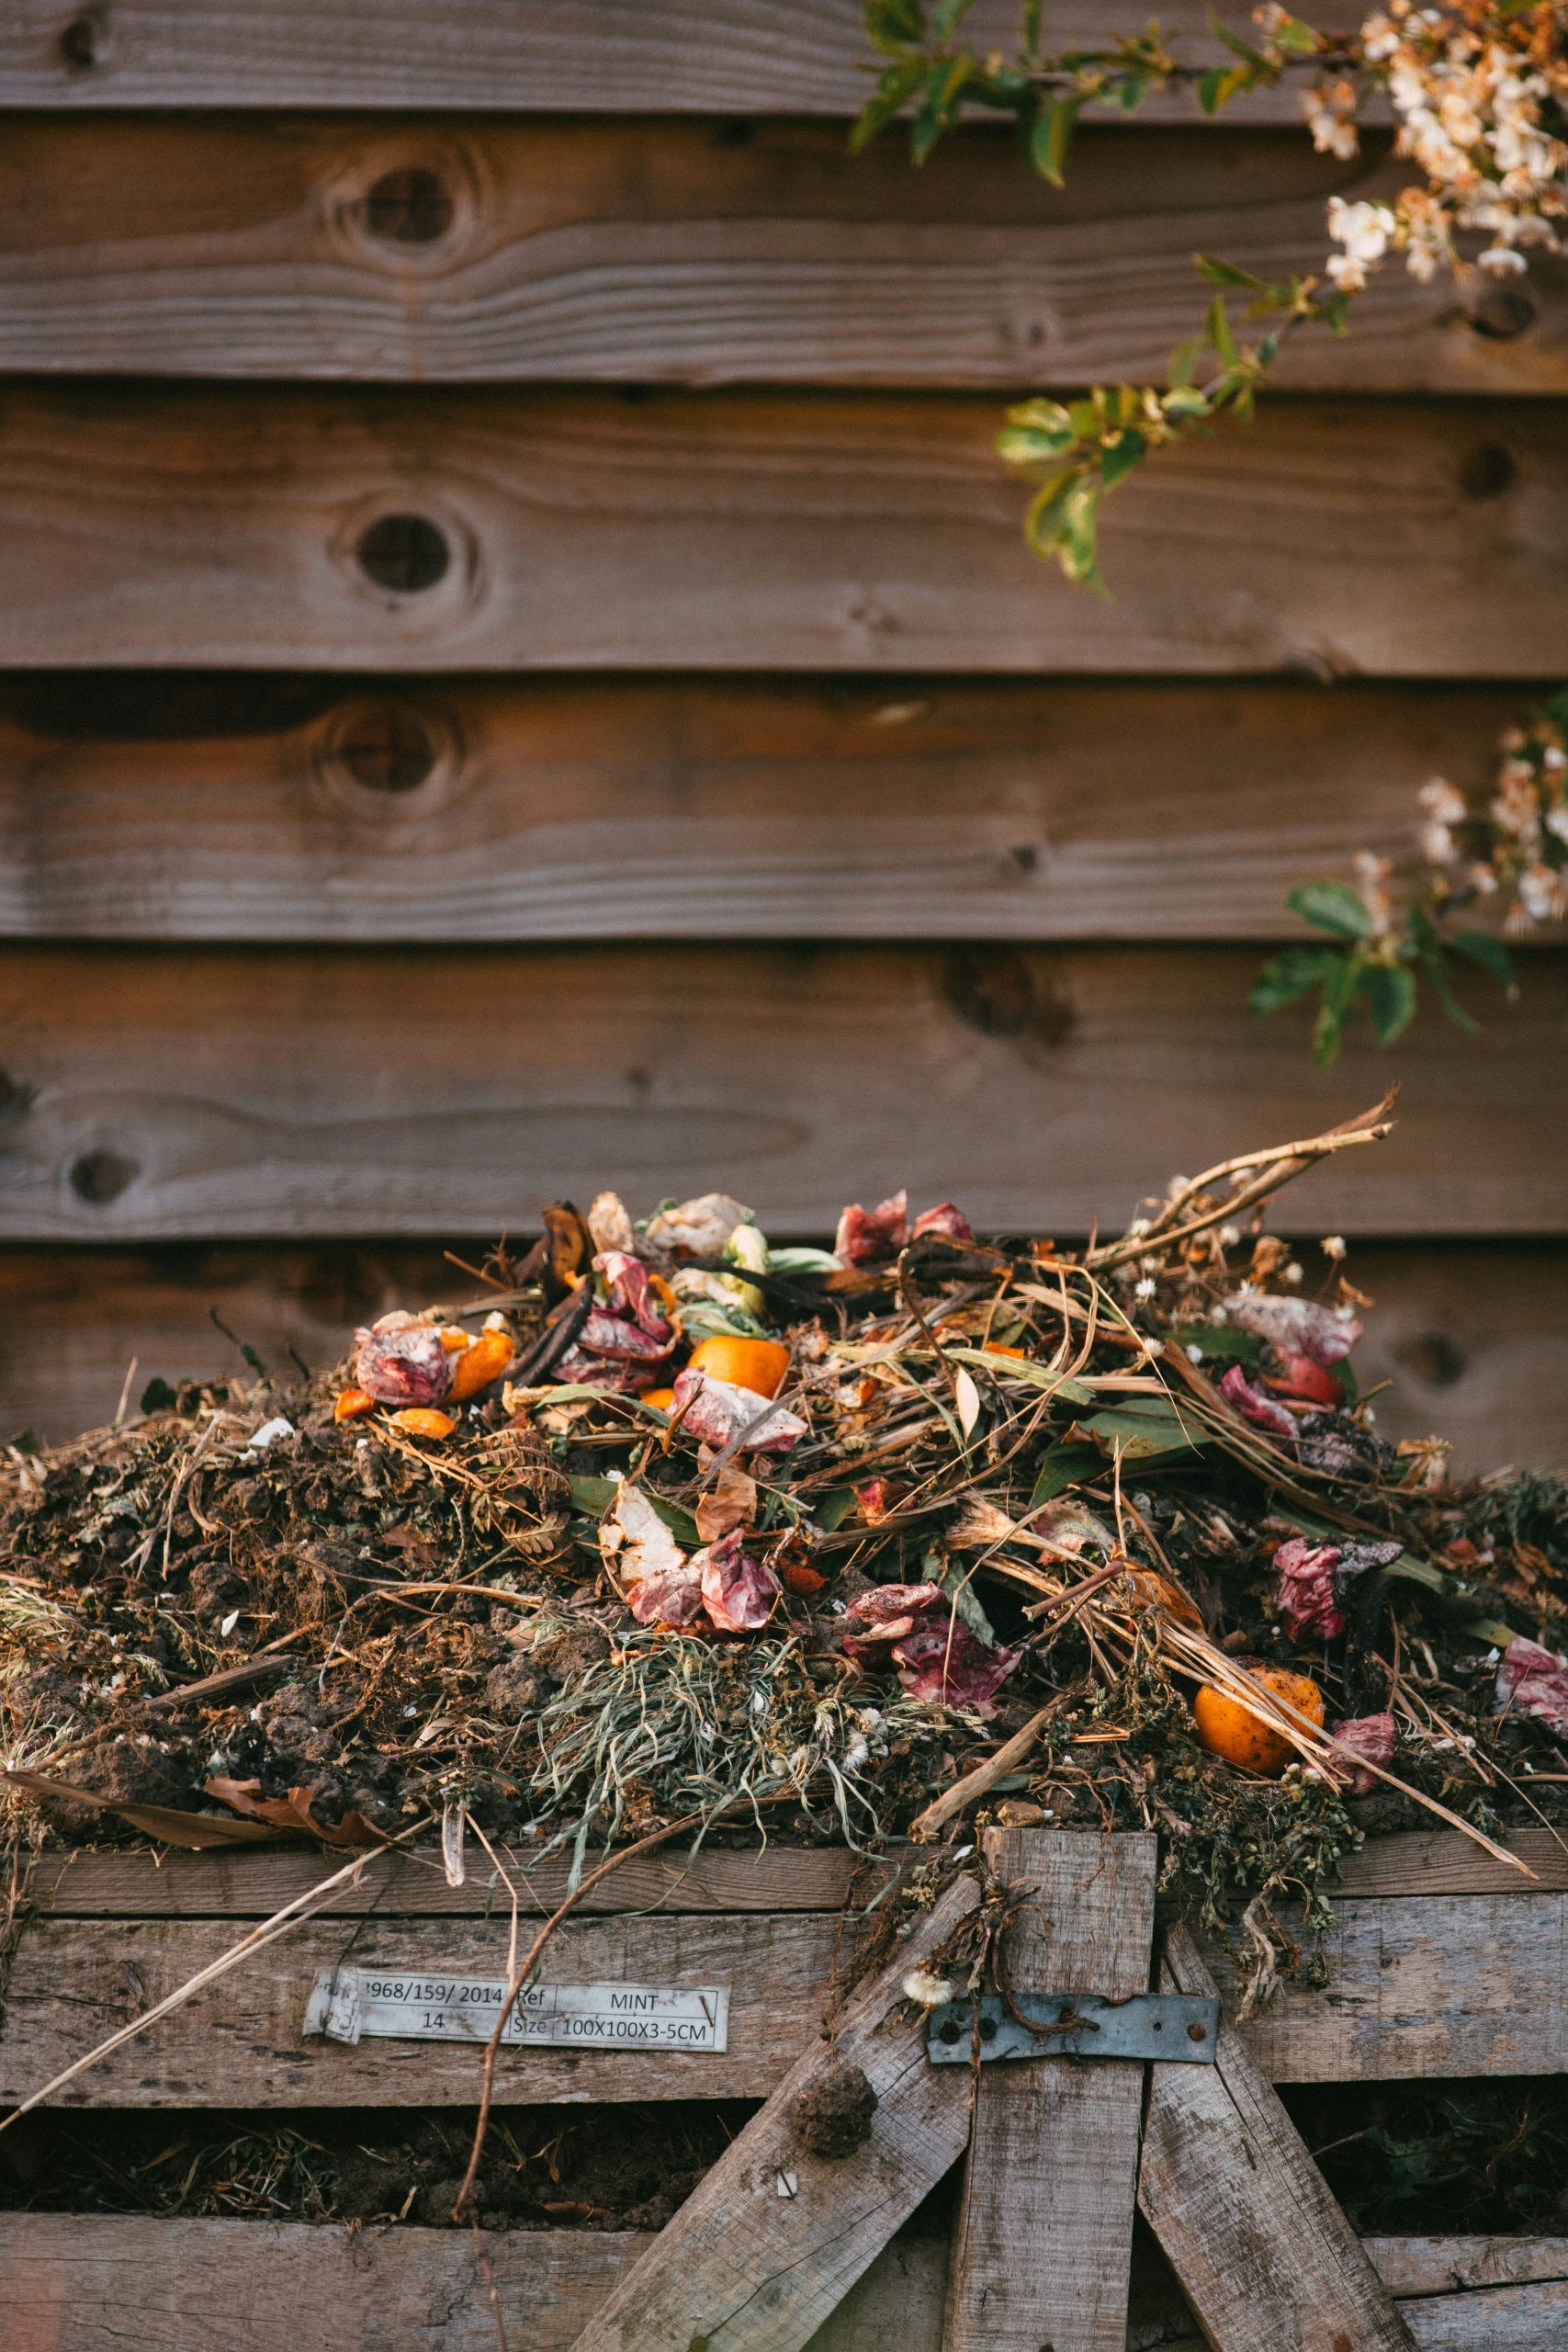 How Can I Compost Food Scraps At Home?